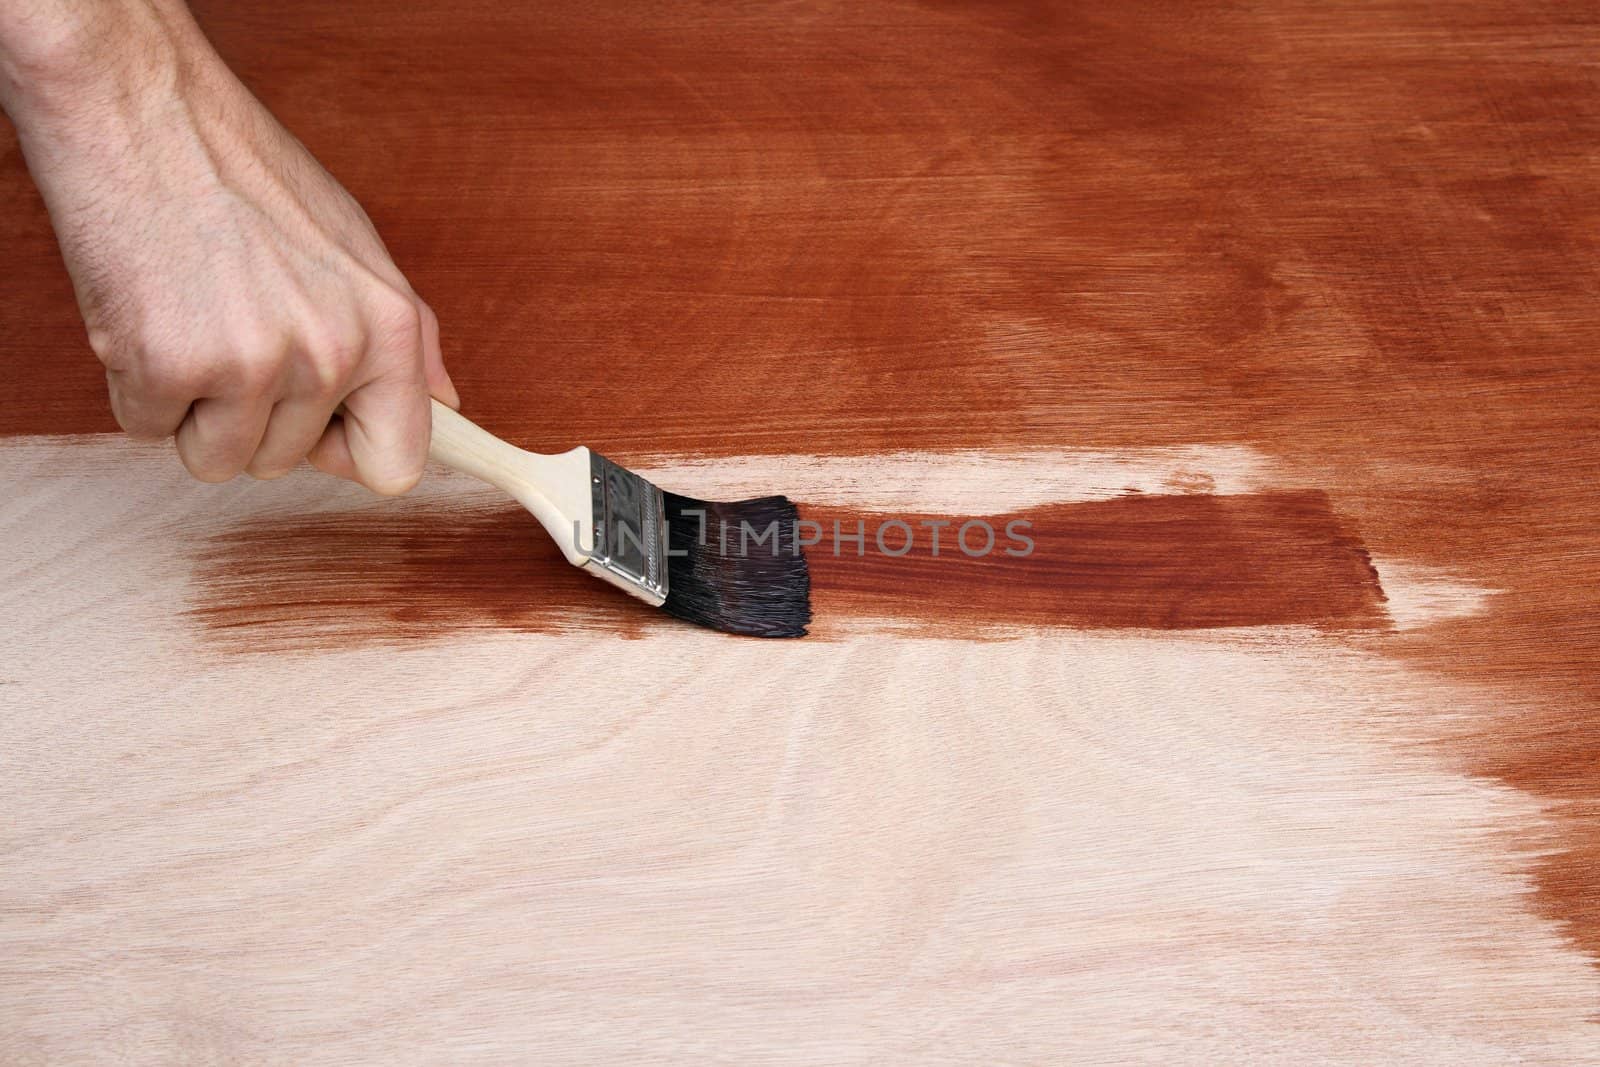 Man's hand painting a wooden surface with a brush.